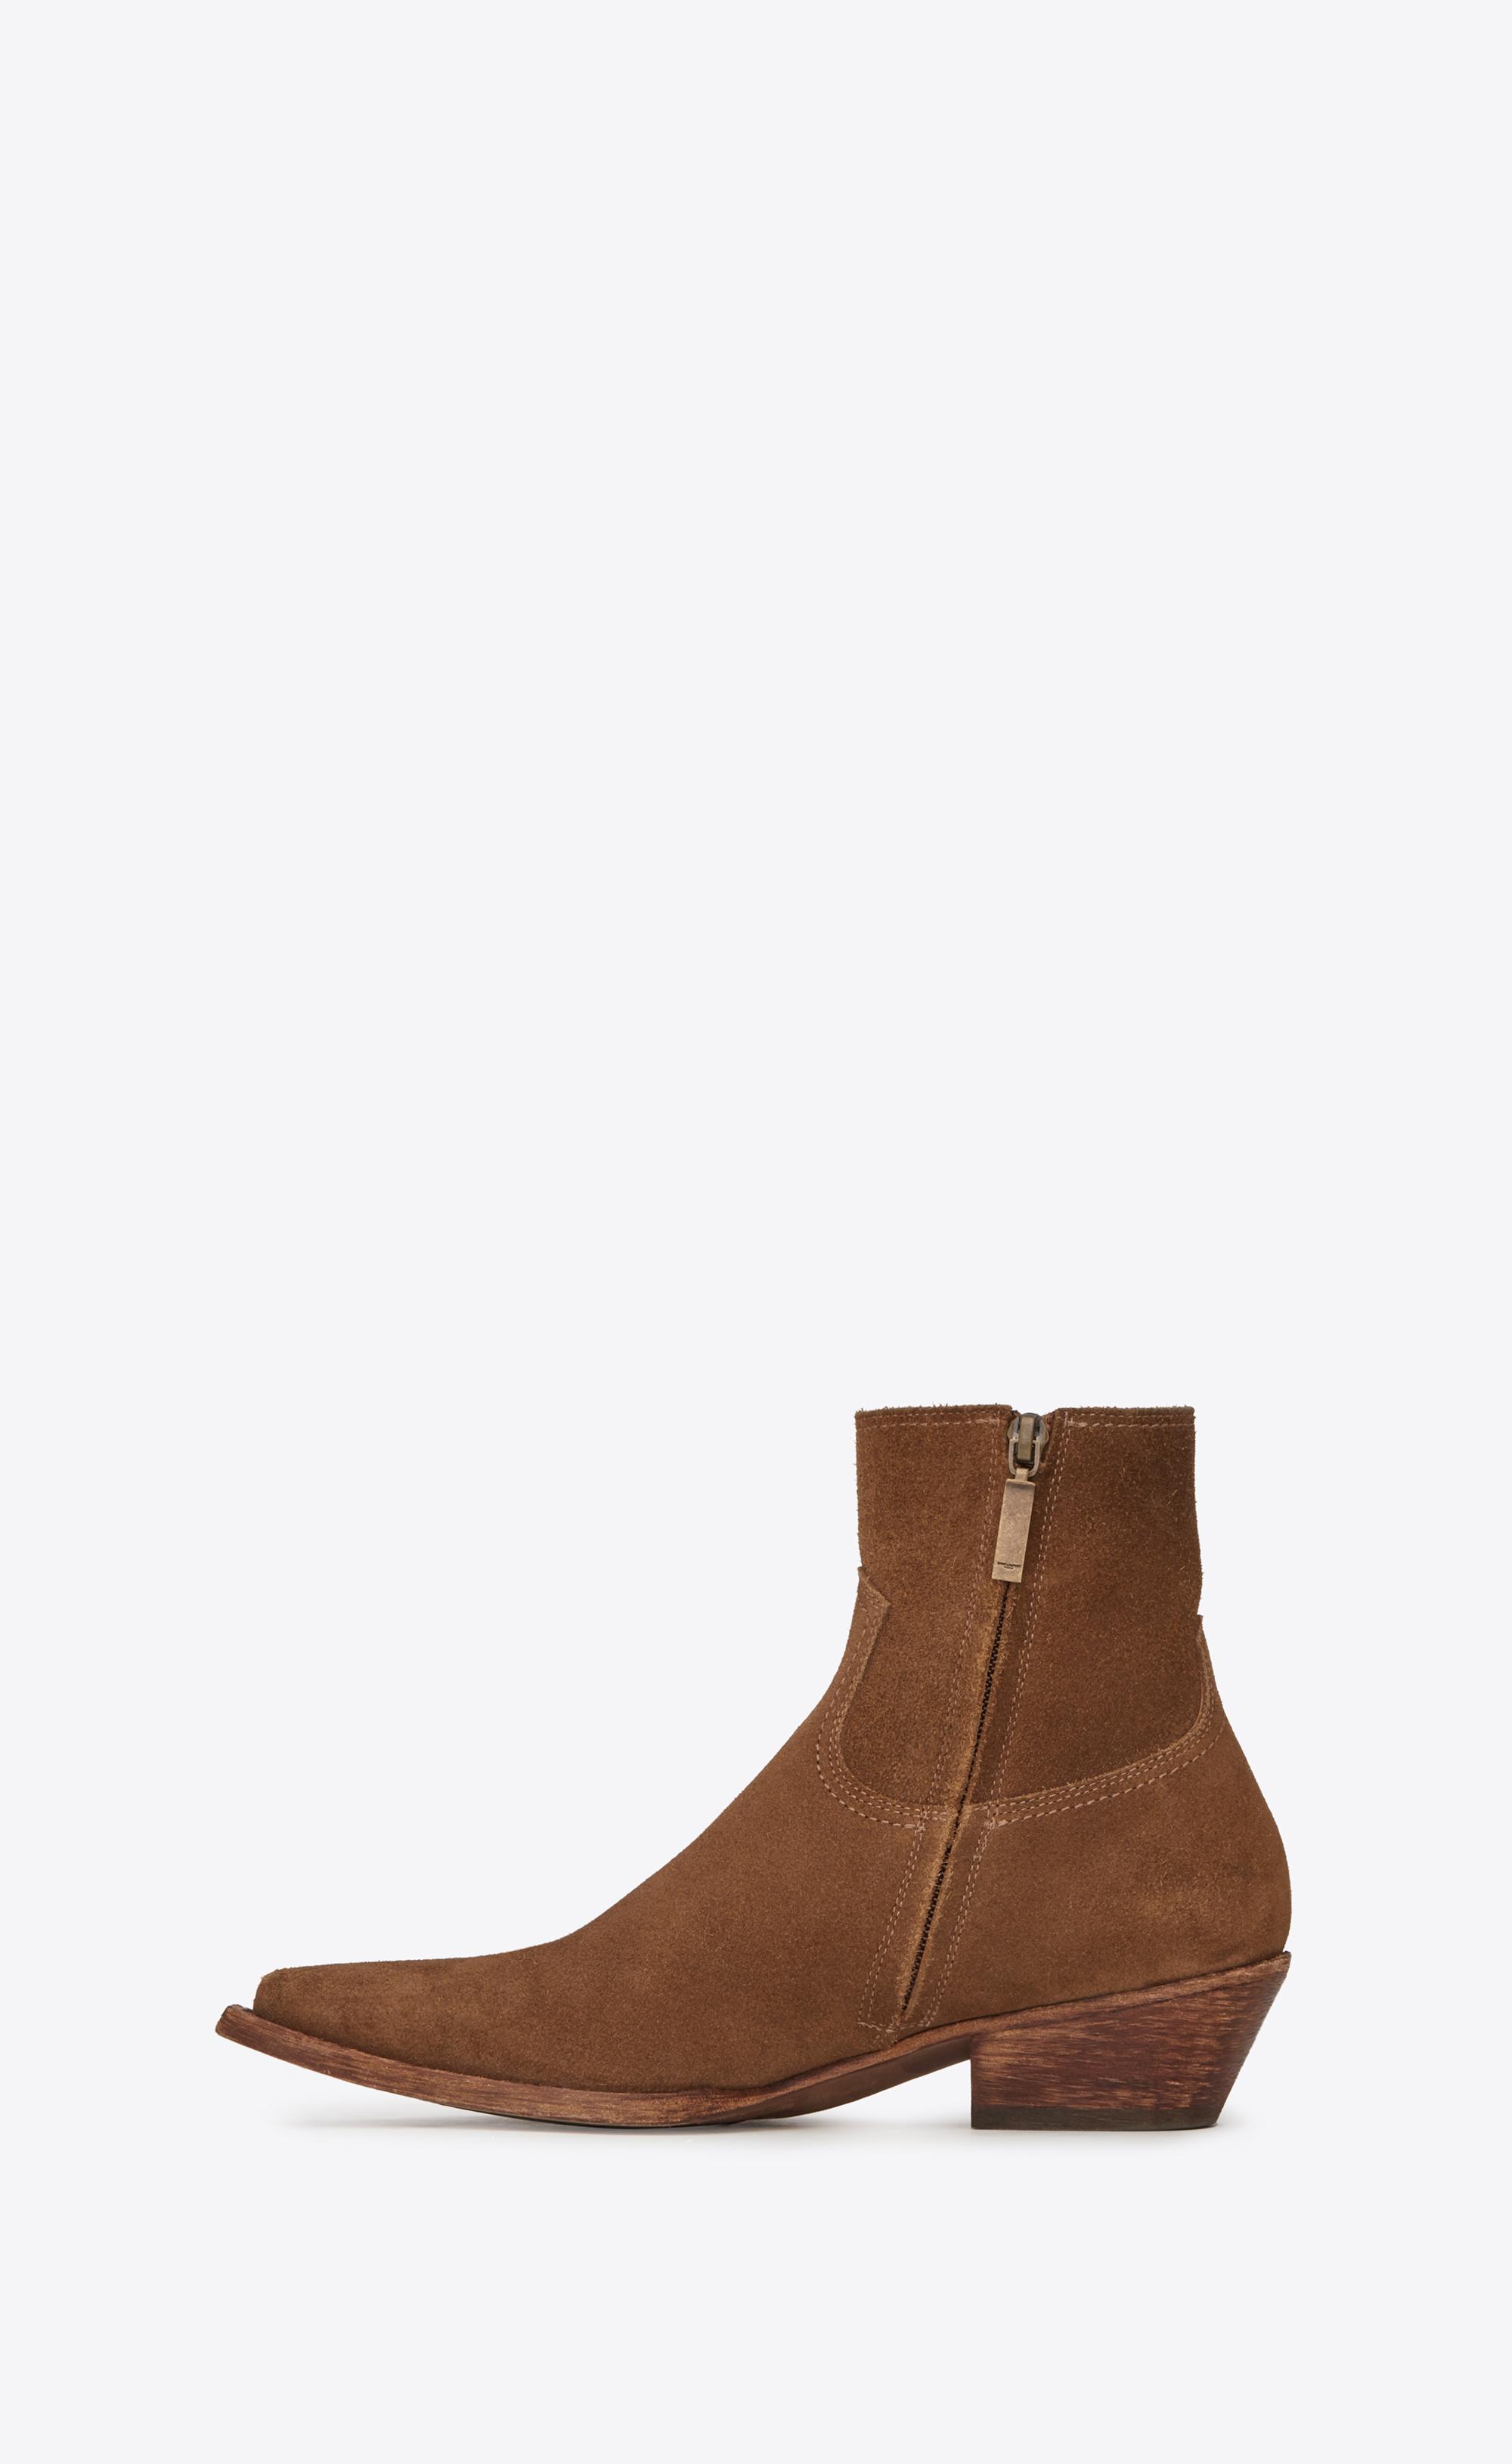 Saint Laurent Leather Lukas 40 Boots in Brown - Lyst